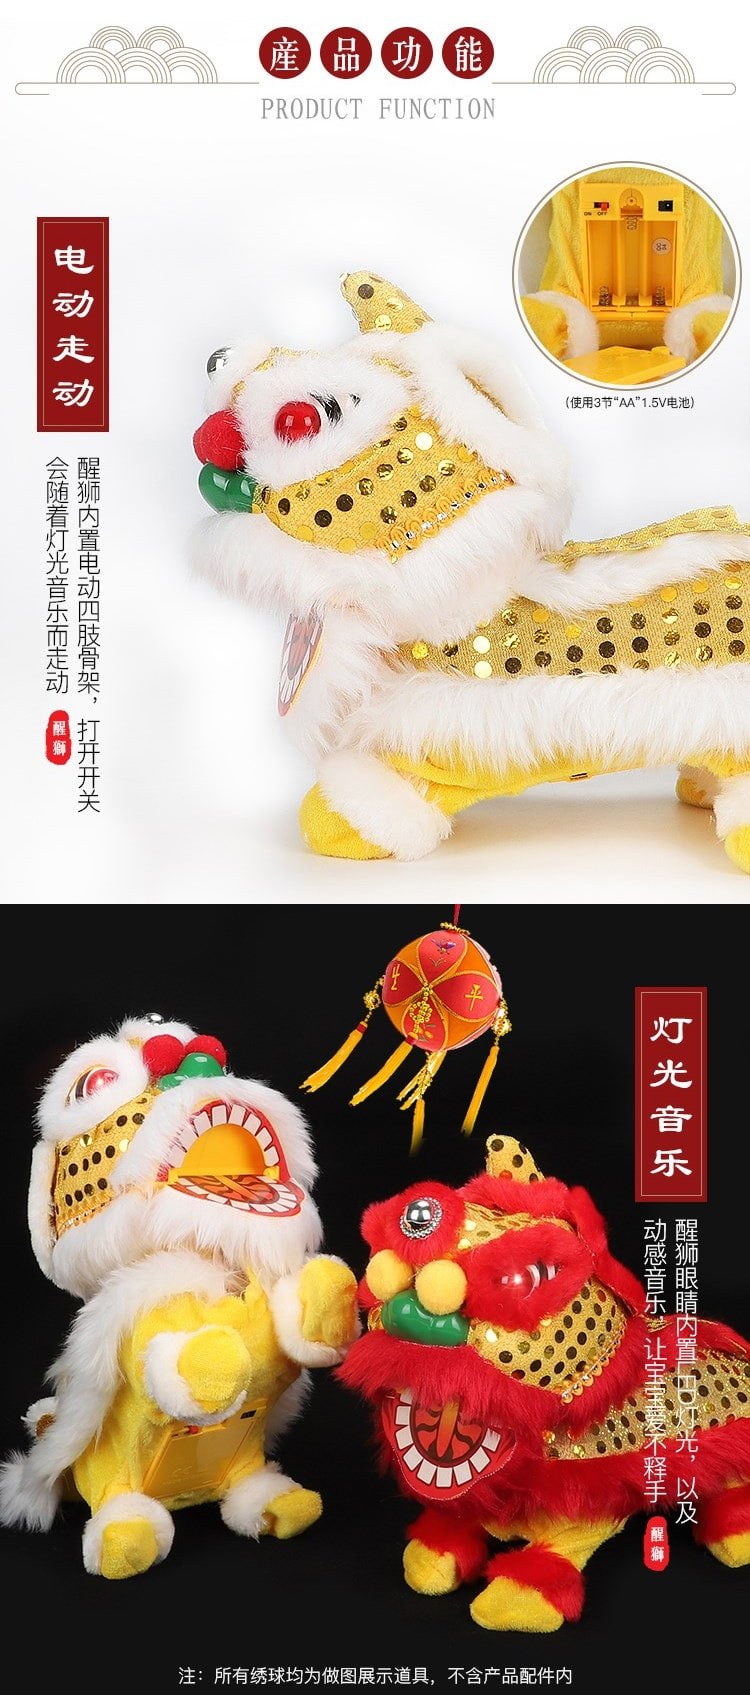 Electronic Fortune Lion Dance - Function